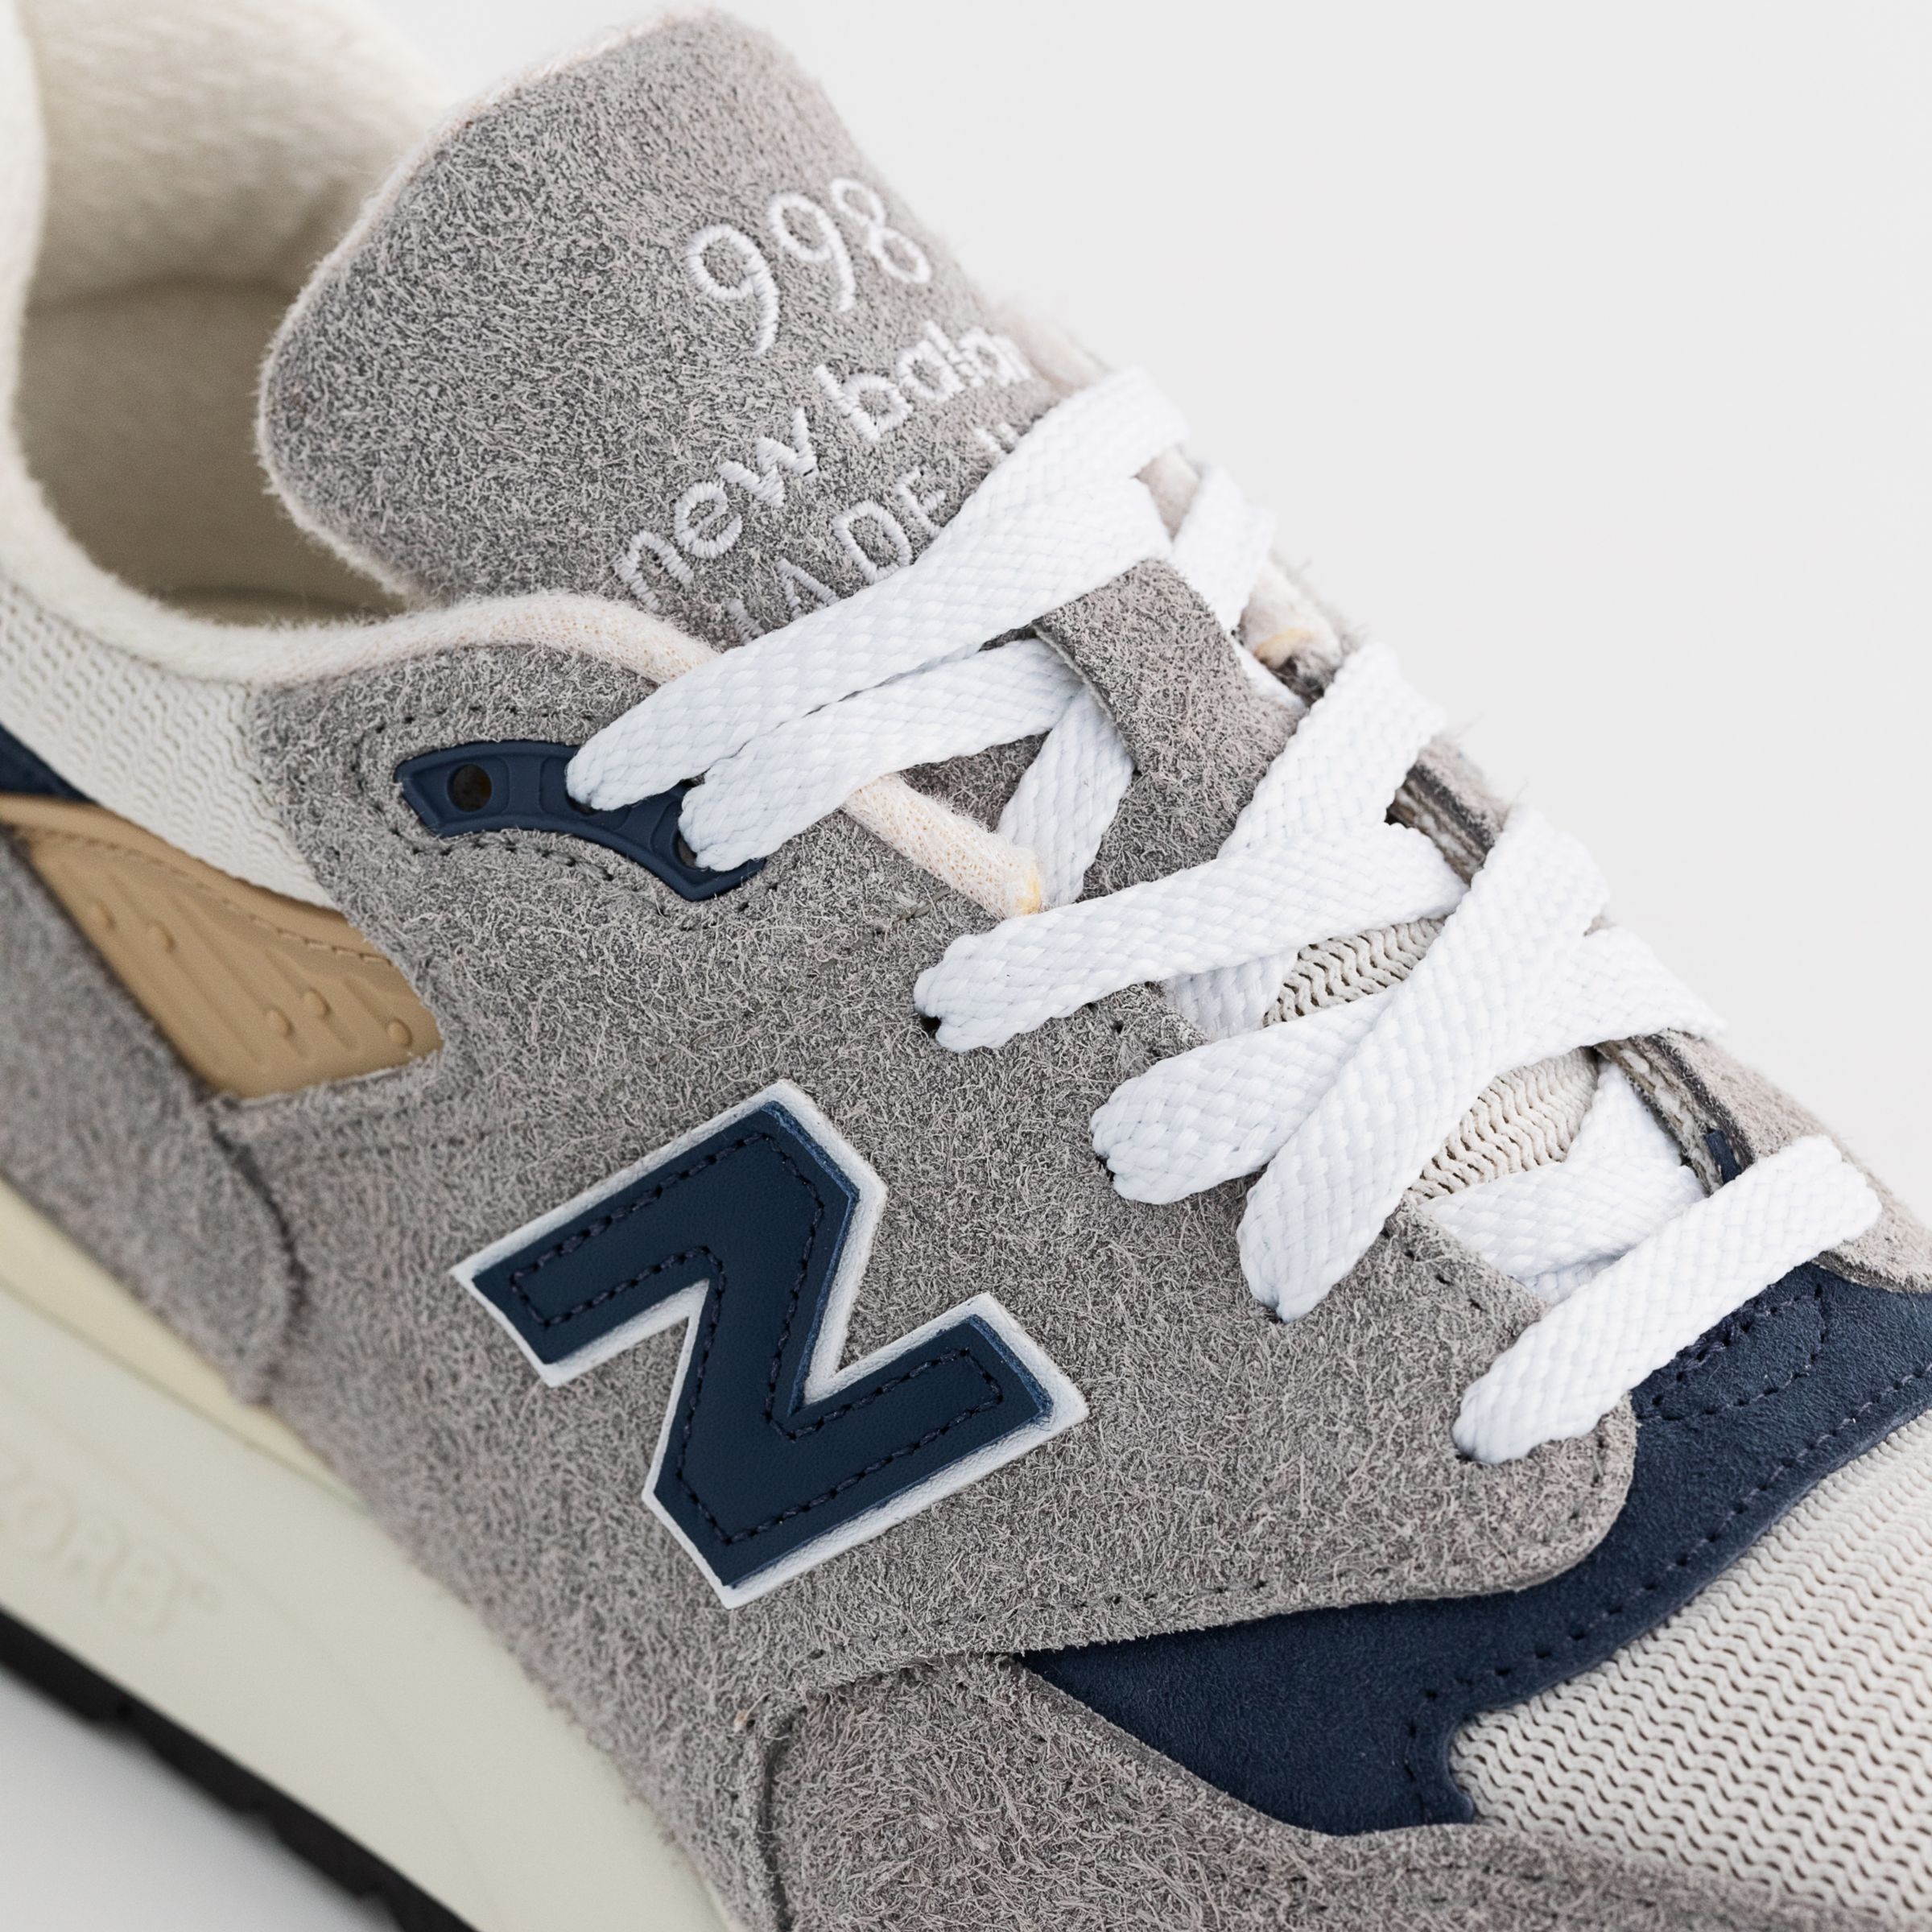 Made in USA 998 - Joe's New Balance Outlet